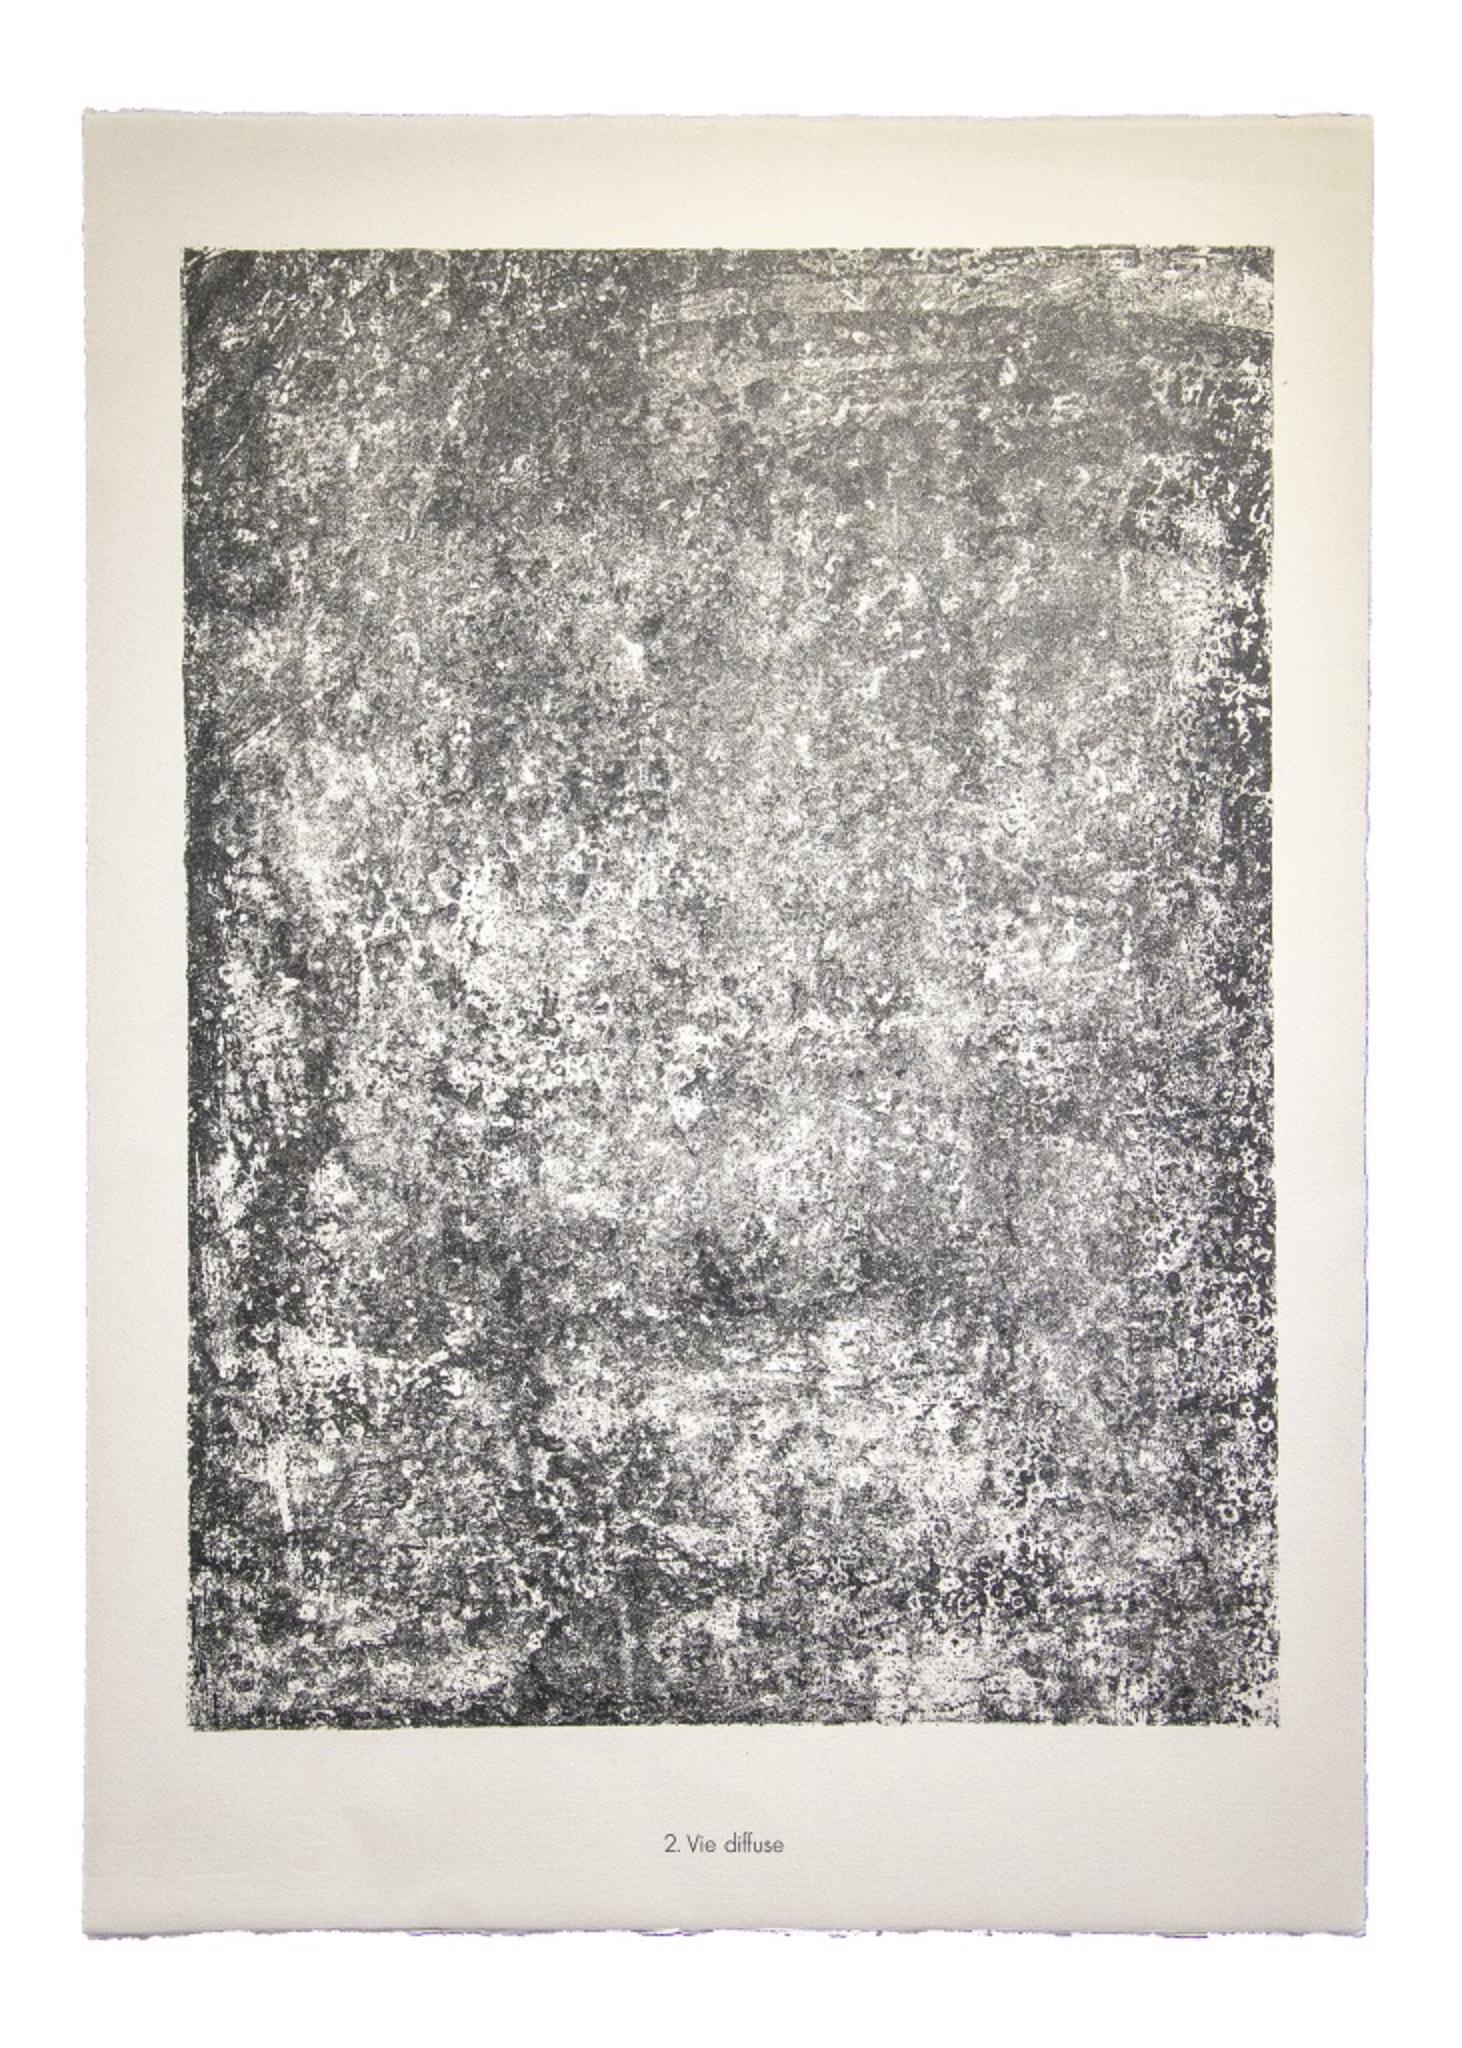 Vie diffuse - From Sols, Terres is an original black and white lithograph realized by Jean Dubuffet (1901 Le Havre - Paris 1985).

The artwork is the plate n. 2 from the portfolio Sols, Terres, that includes 18 lithographs, realized in